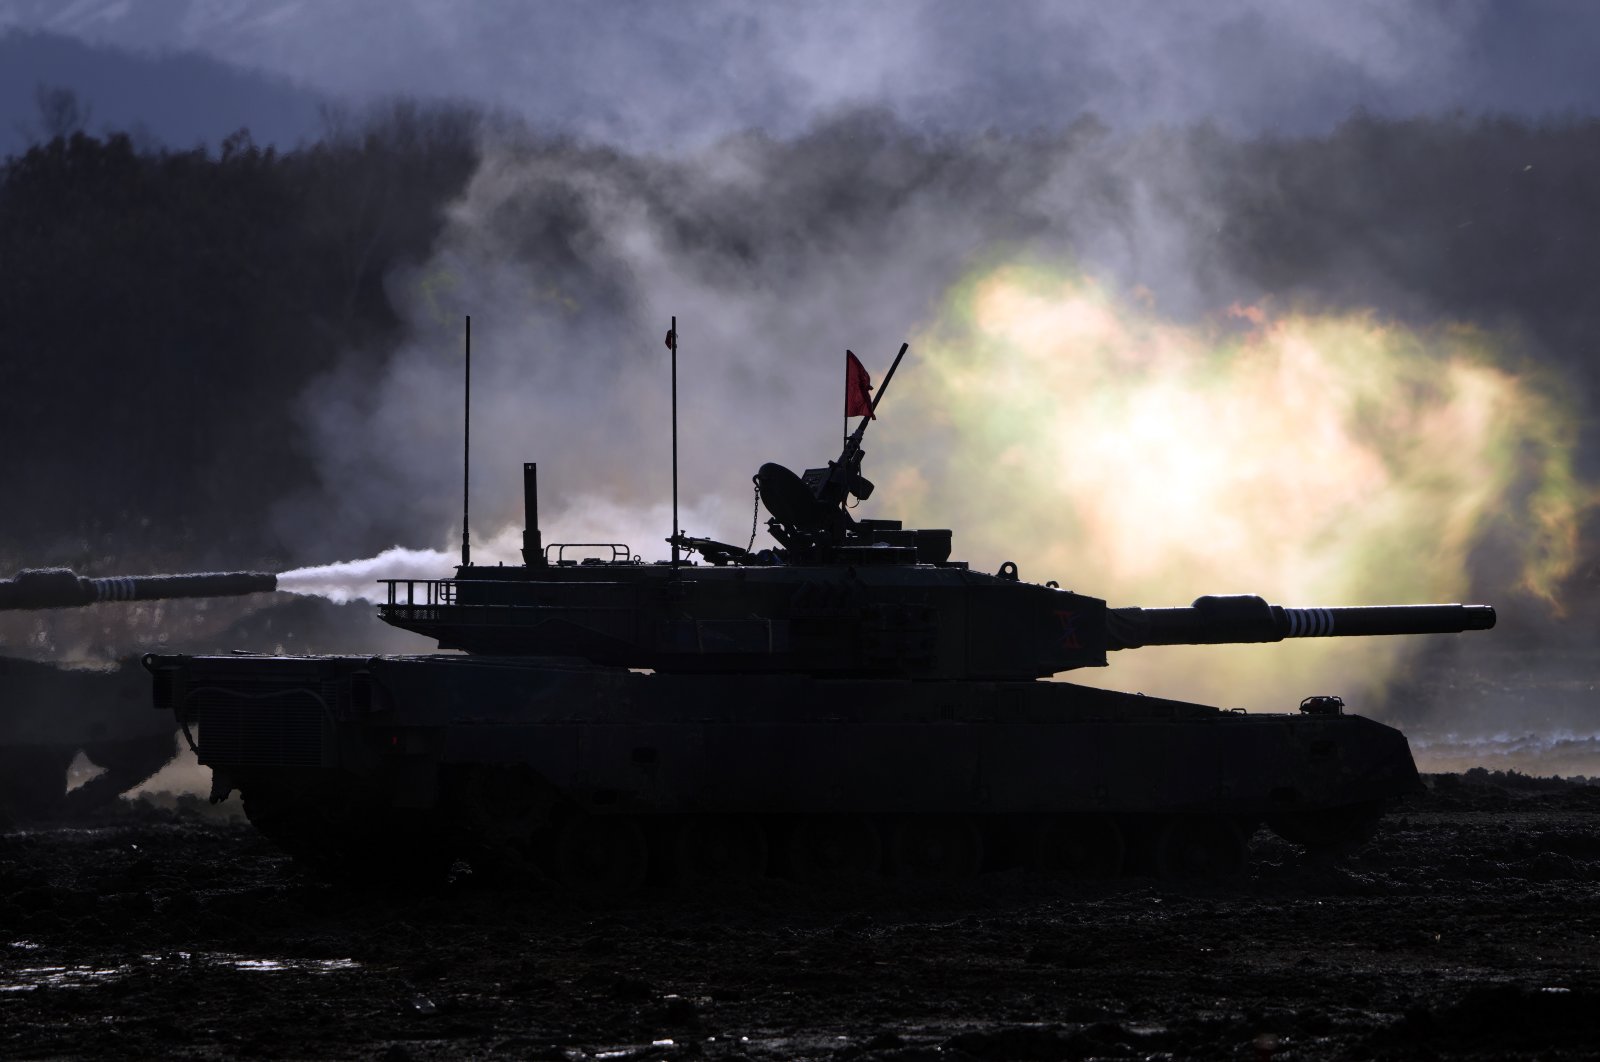 Japanese military Type 90 tanks fire at a target with live ammunition during an annual drill at Minami Eniwa Camp in Eniwa on the northern Japanese island of Hokkaido, Dec. 6, 2021. (AP Photo)